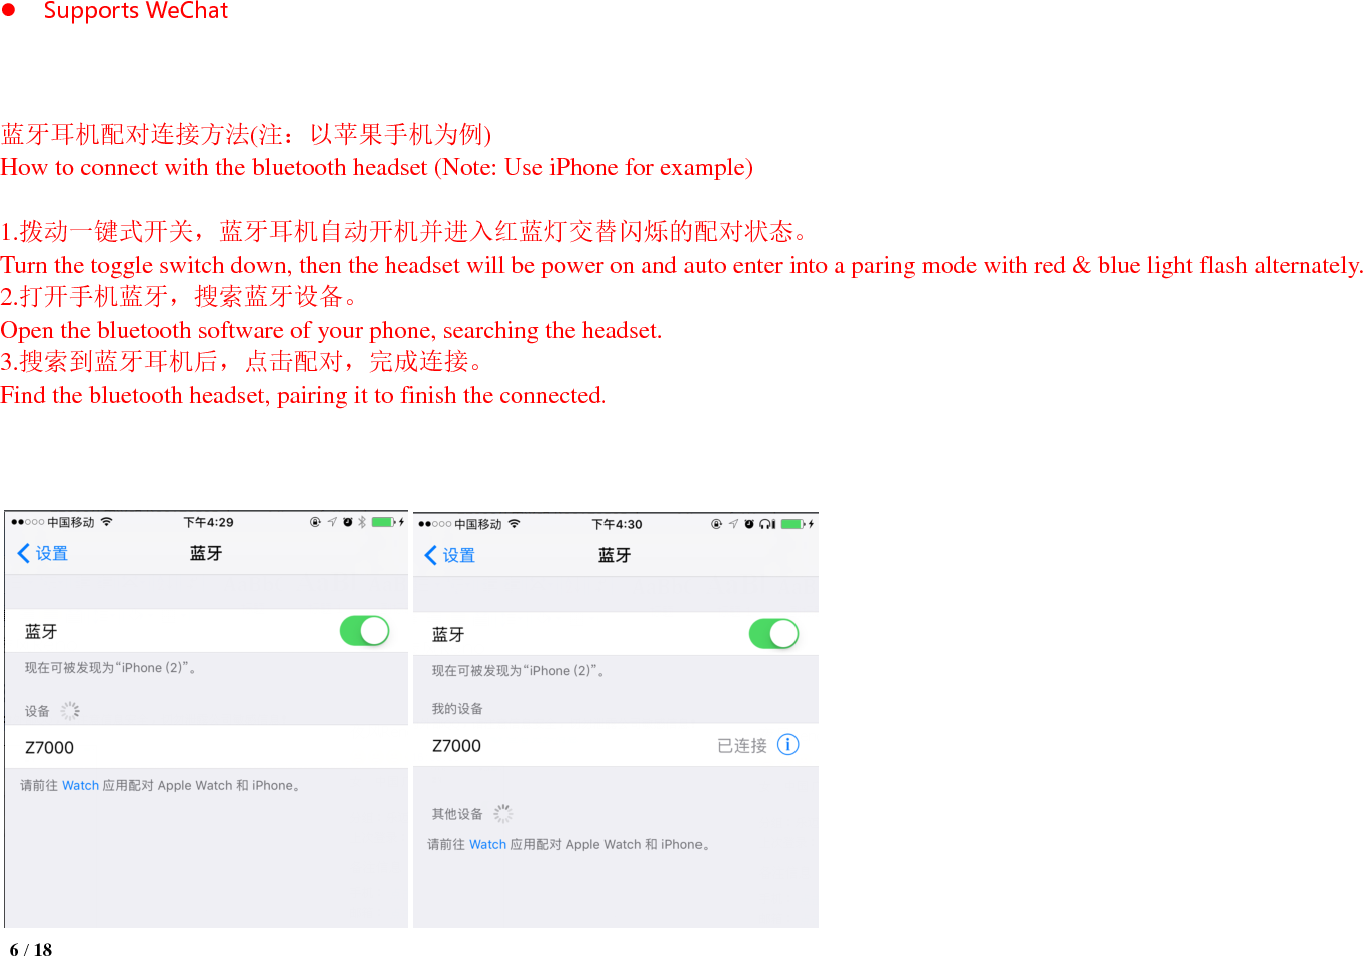  6 / 18   Supports WeChat      蓝牙耳机配对连接方法(注：以苹果手机为例) How to connect with the bluetooth headset (Note: Use iPhone for example)  1.拨动一键式开关，蓝牙耳机自动开机并进入红蓝灯交替闪烁的配对状态。 Turn the toggle switch down, then the headset will be power on and auto enter into a paring mode with red &amp; blue light flash alternately. 2.打开手机蓝牙，搜索蓝牙设备。 Open the bluetooth software of your phone, searching the headset. 3.搜索到蓝牙耳机后，点击配对，完成连接。 Find the bluetooth headset, pairing it to finish the connected.       